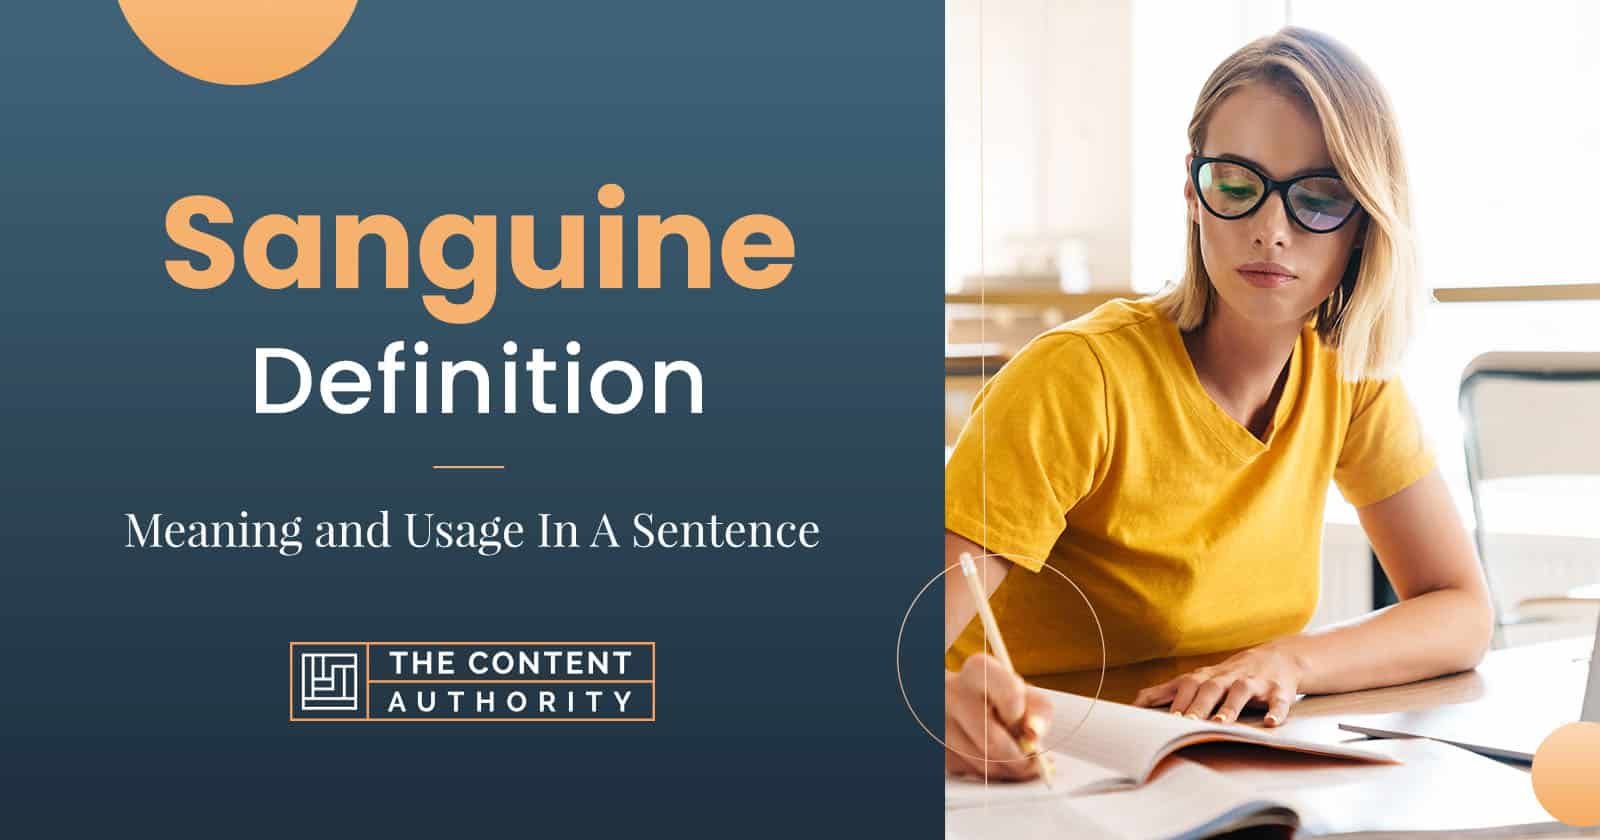 Sanguine Definition – Meaning and Usage in a Sentence